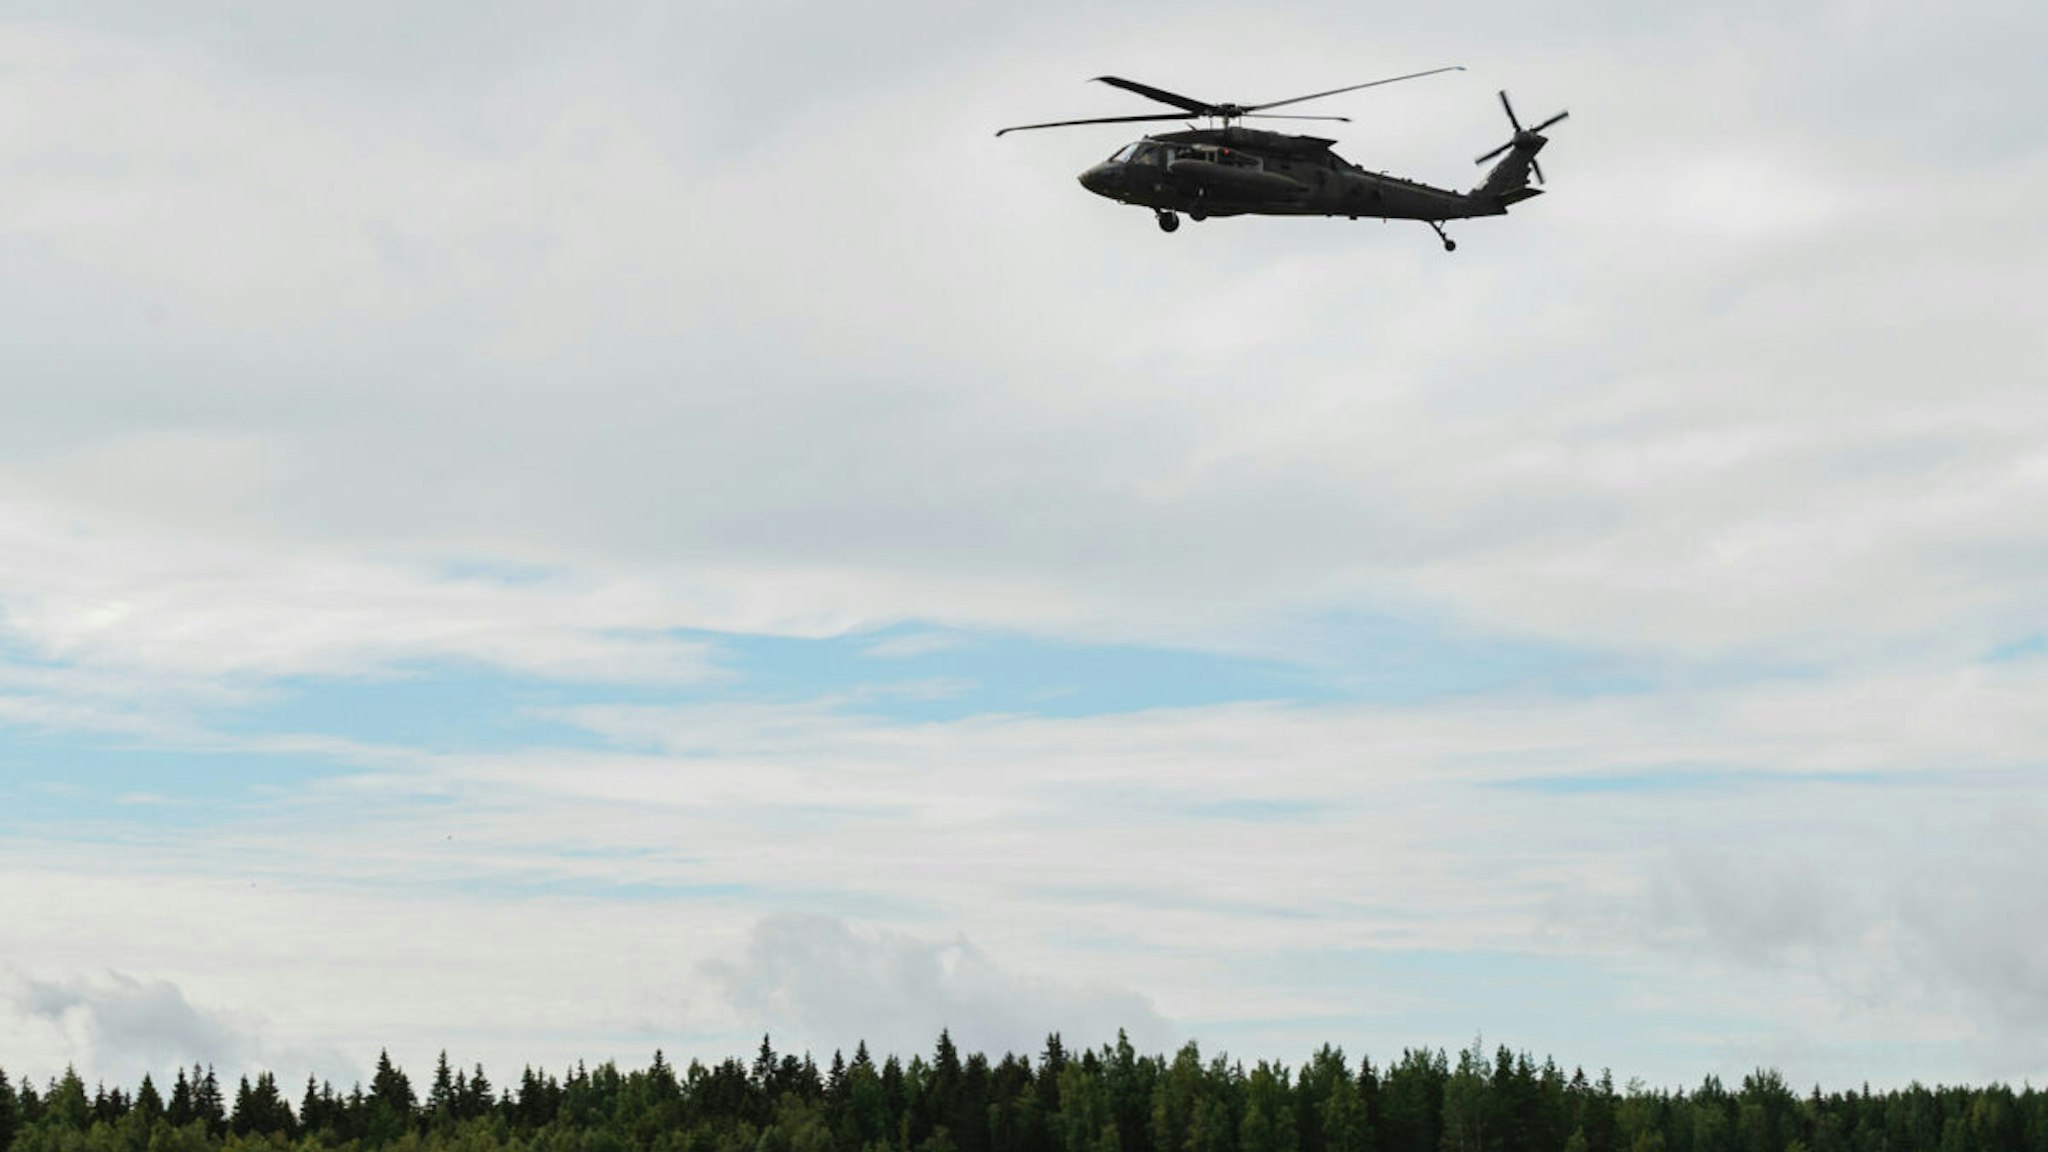 A Sikorsky UH-60 Black Hawk helicopter from US army aviation, 12th Combat Aviation Brigade, taking part in a joint military helicopter training exercise hosted by the Finnish Army's Utti Jaeger Regiment in Pirkkala, Finland, on Wednesday, Aug. 3, 2022